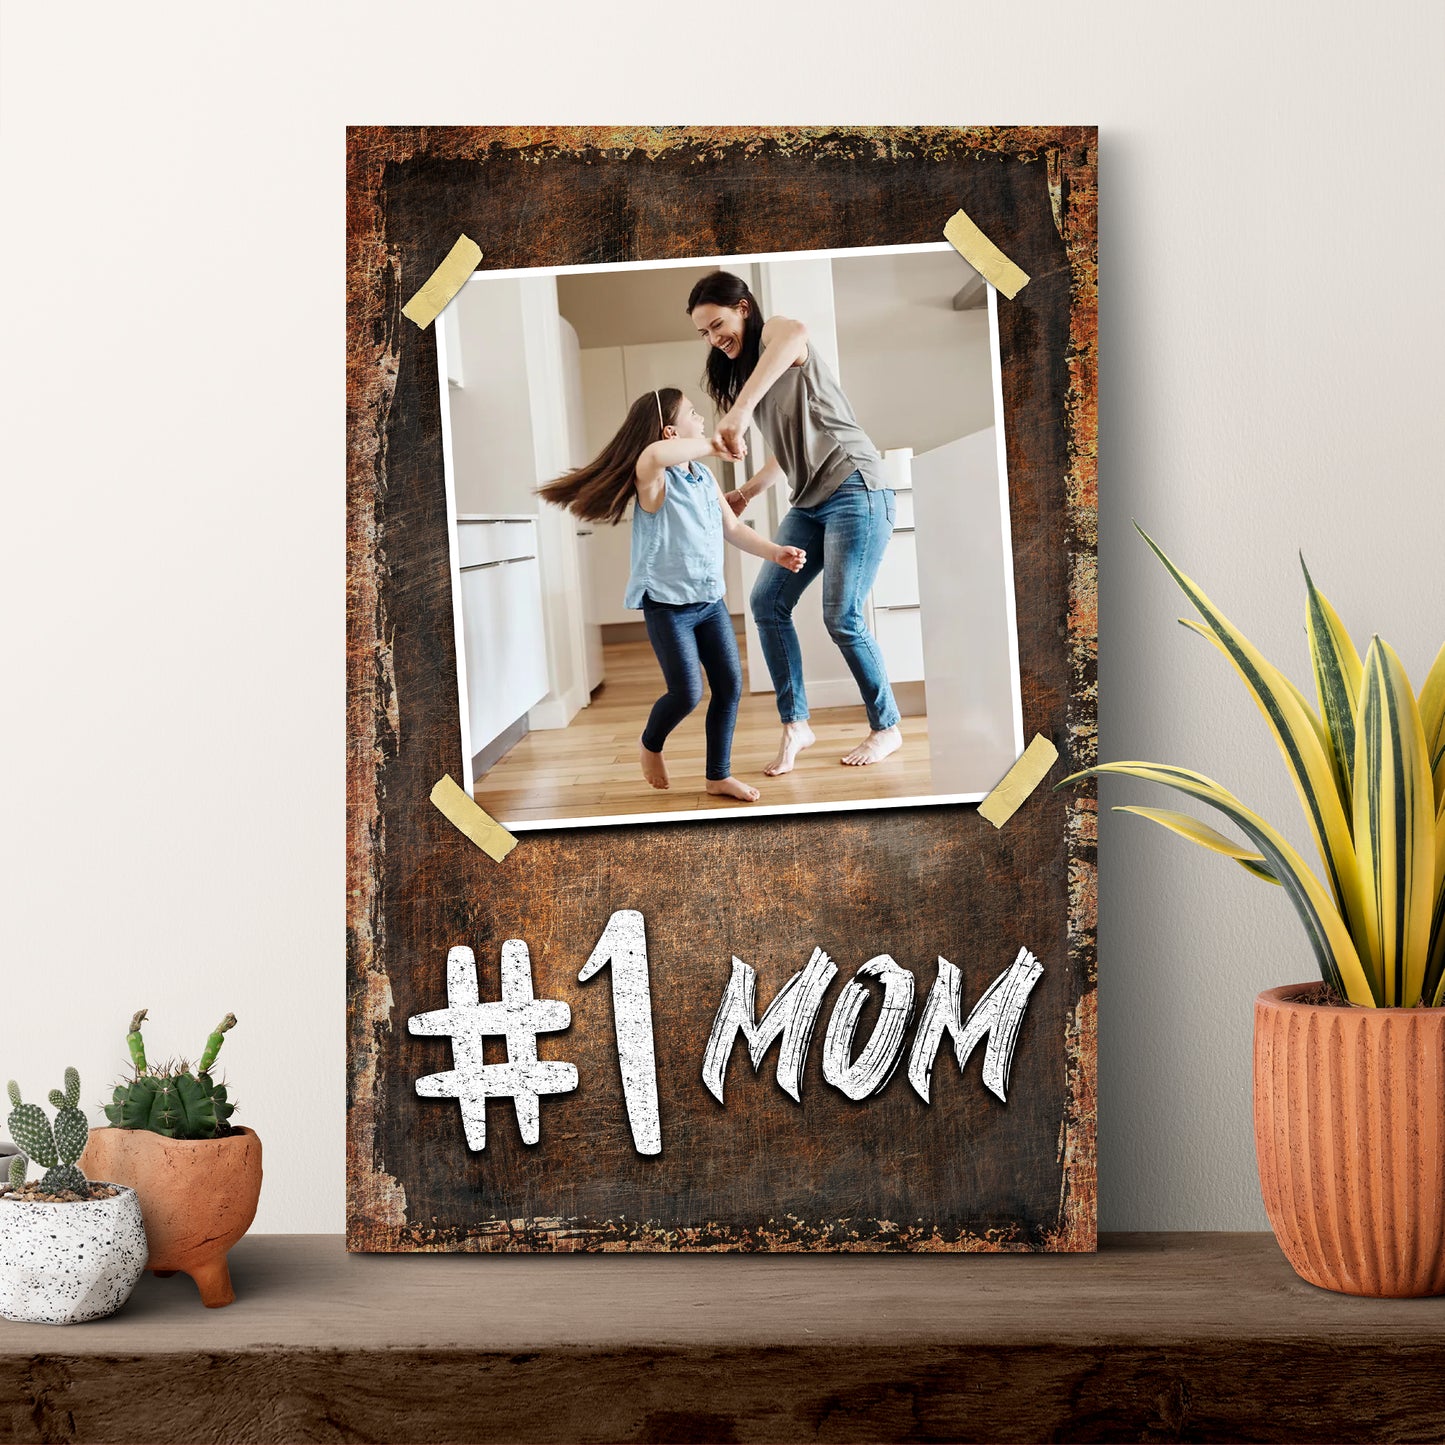 #1 Mom Happy Mother's Day Sign - Image by Tailored Canvases